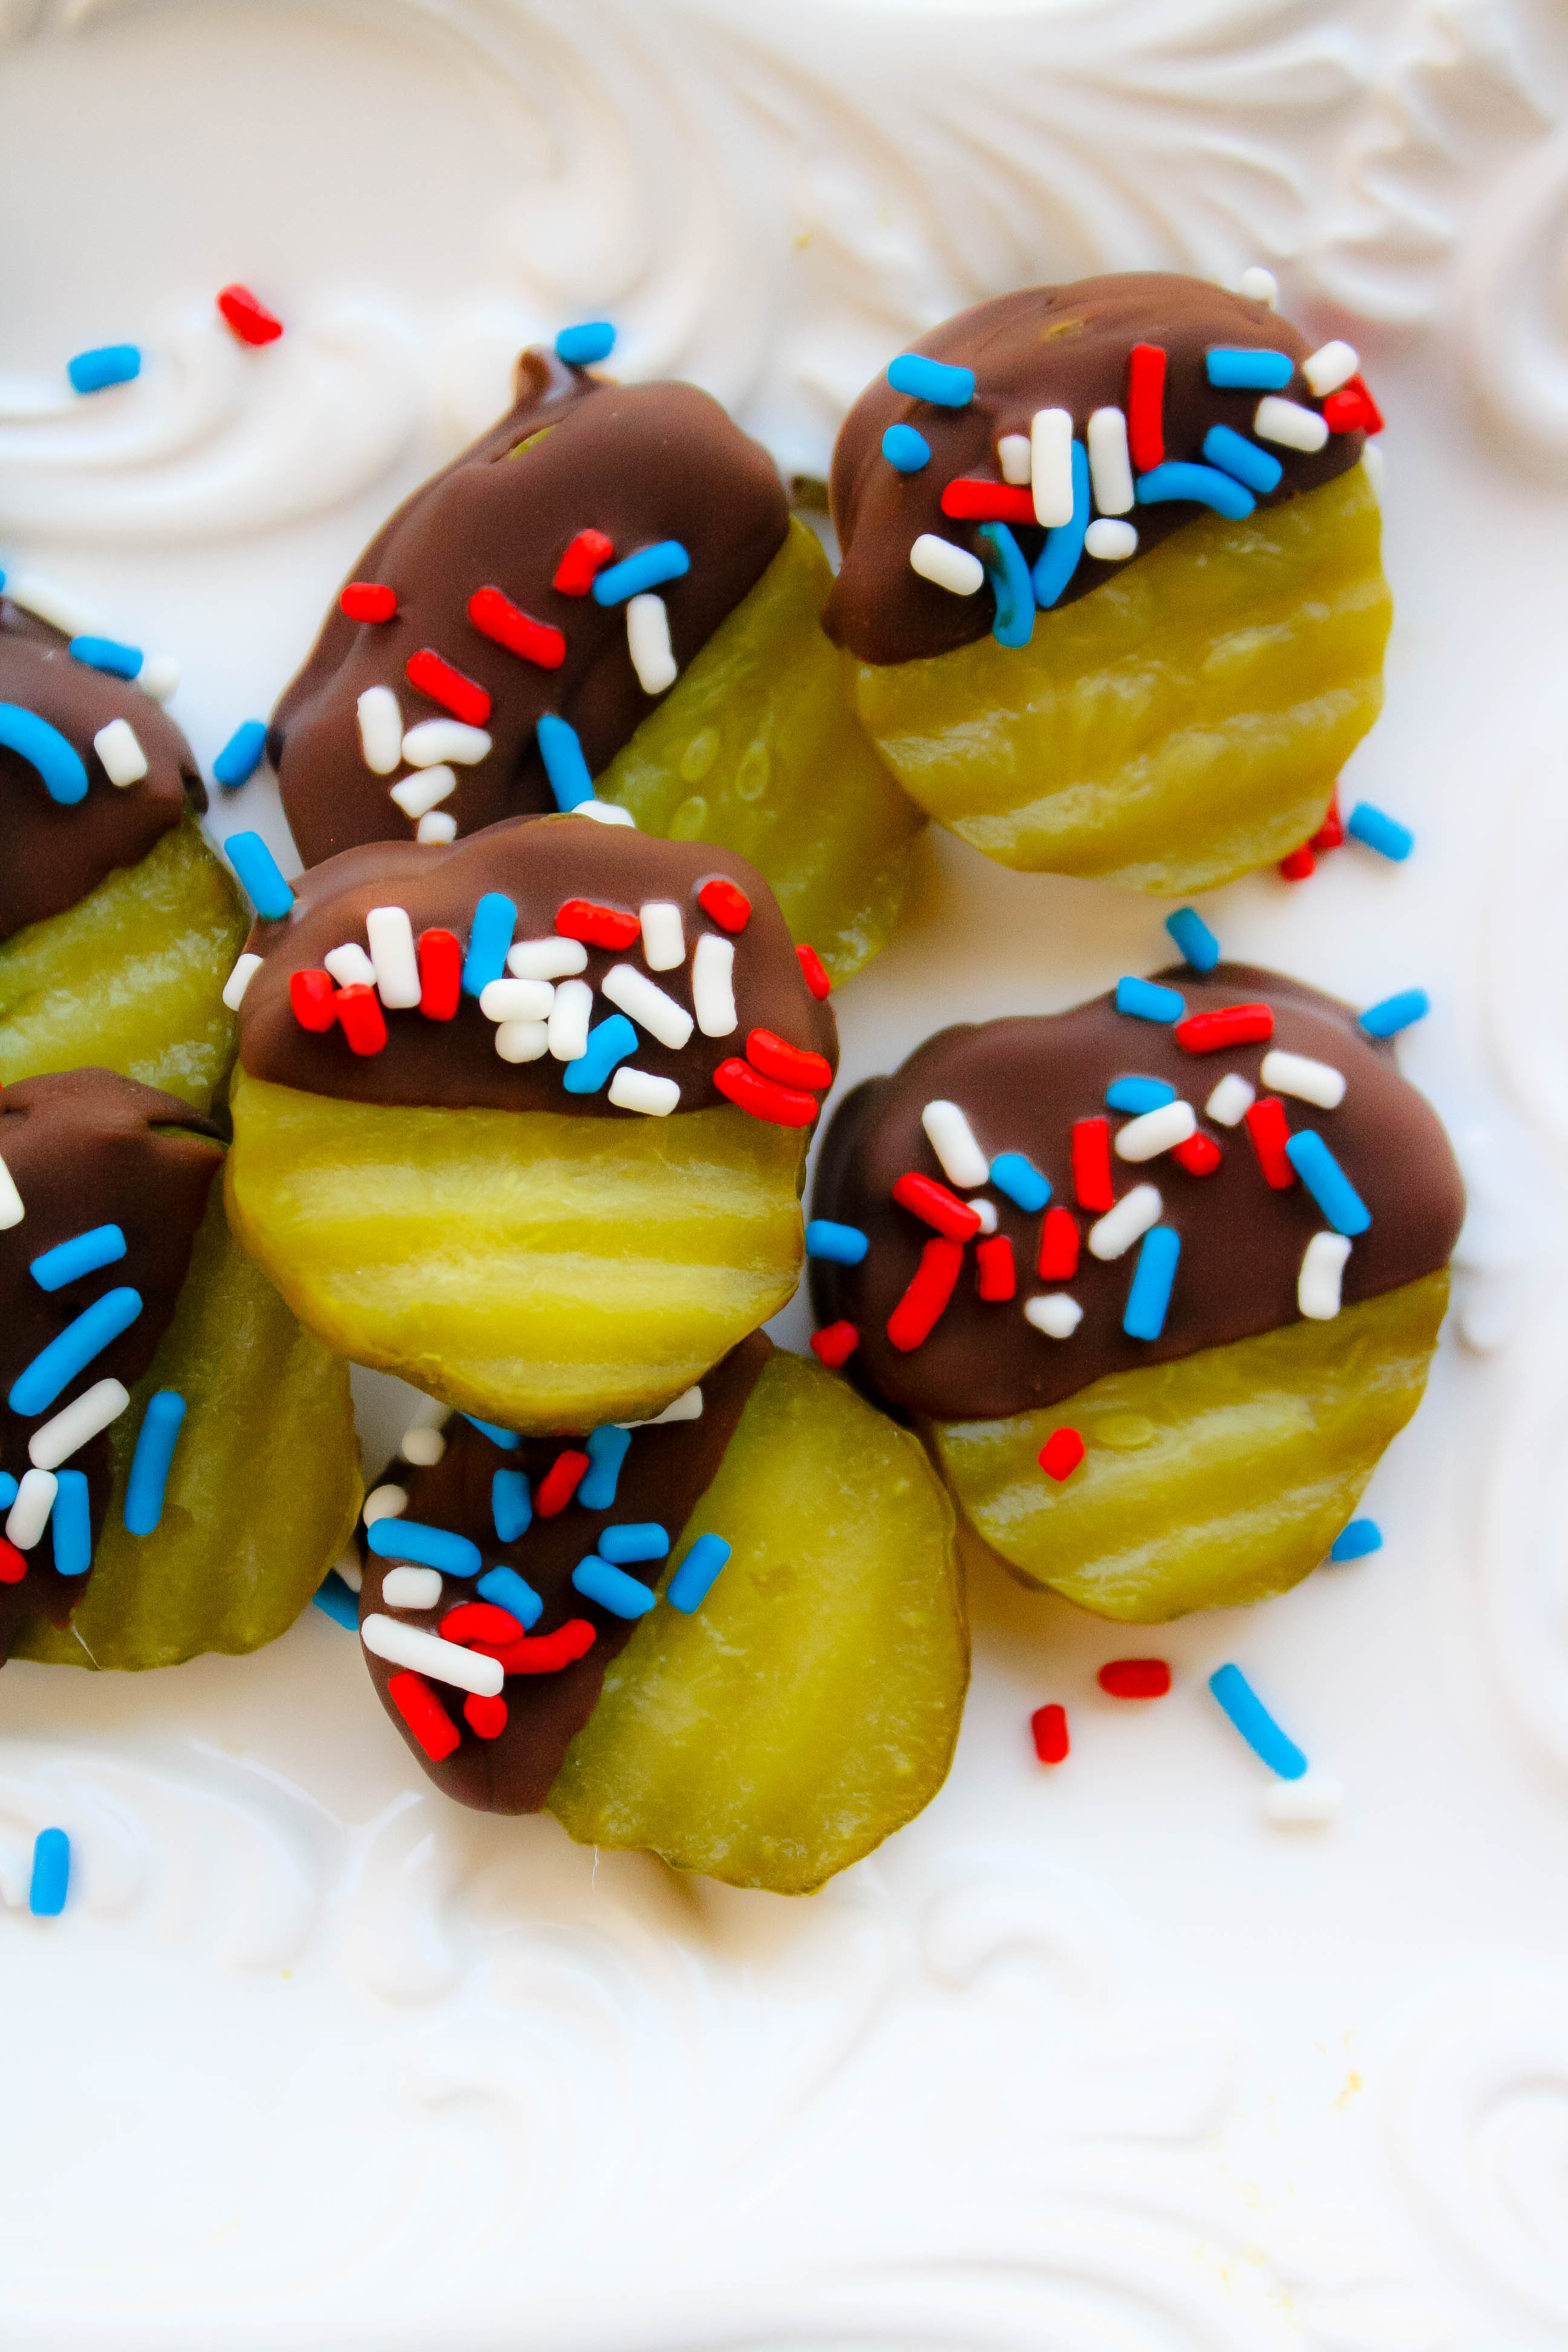 Chocolate Covered Pickles with Homemade Magic Shell are tasty little treats that will make you smile! These Chocolate Covered Pickles with Homemade Magic Shell are such fun treats for anytime!